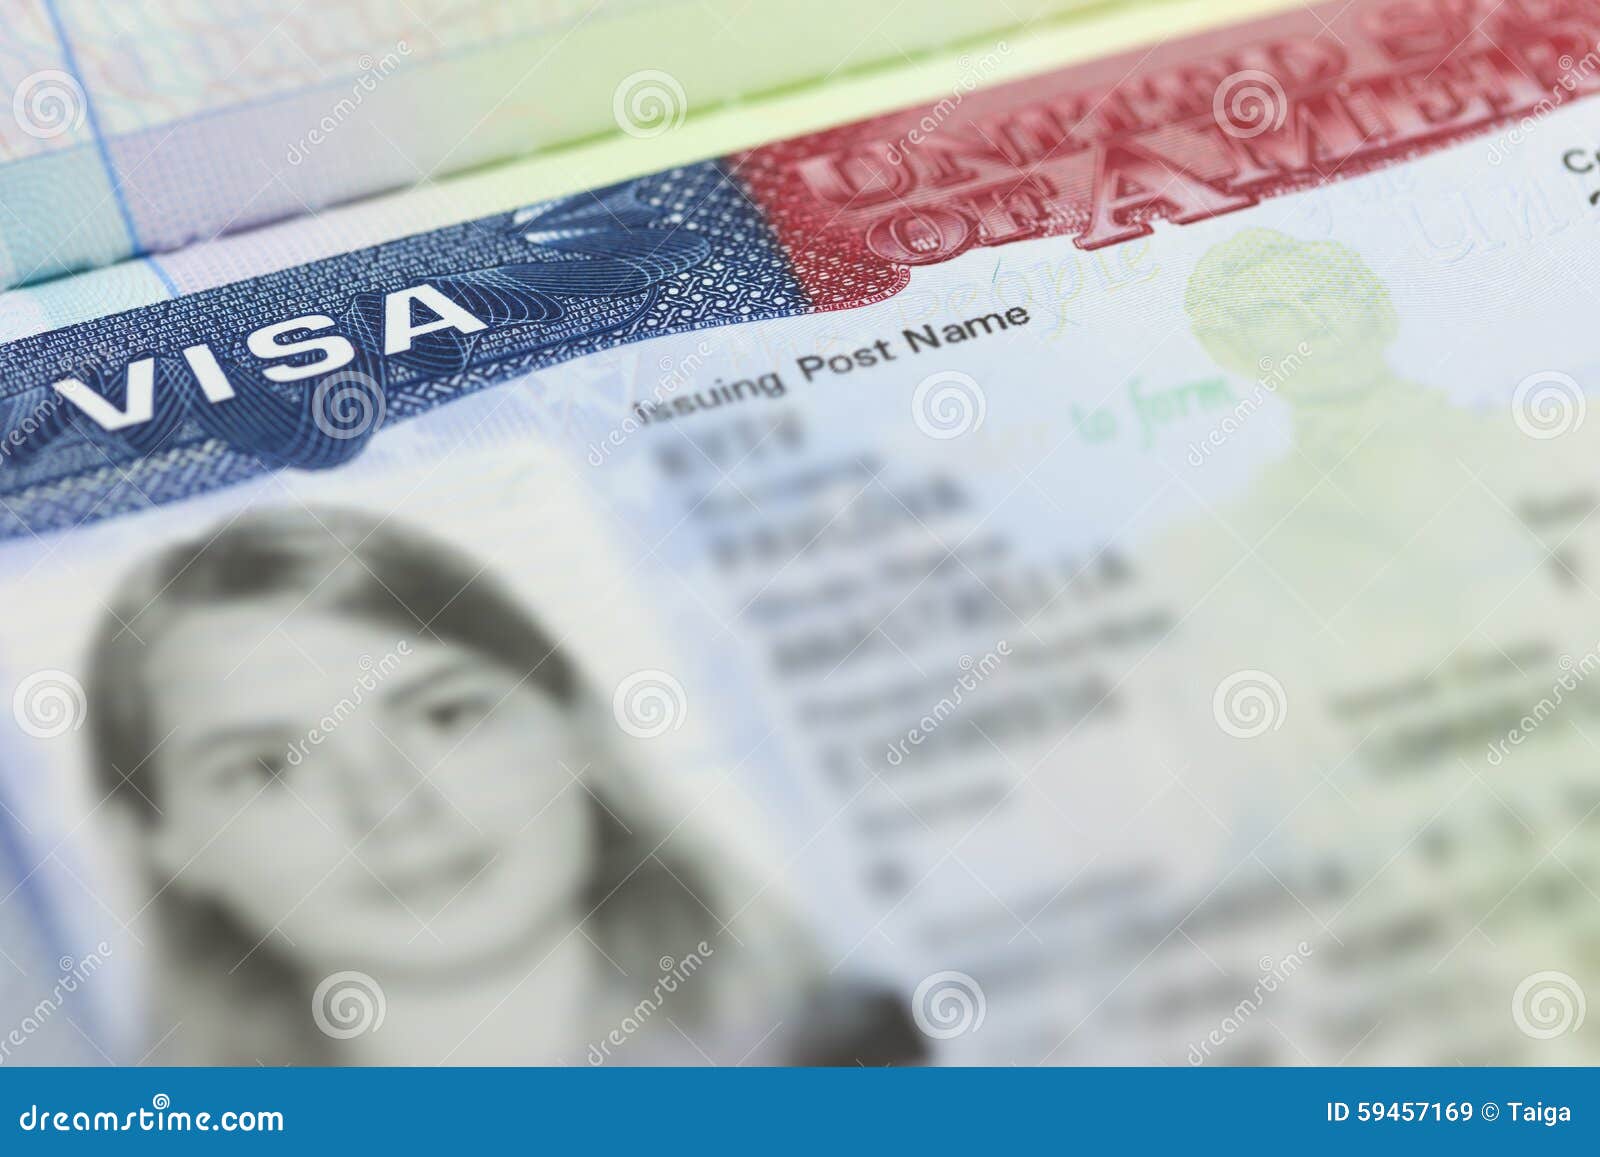 the american visa in a passport page (usa) background